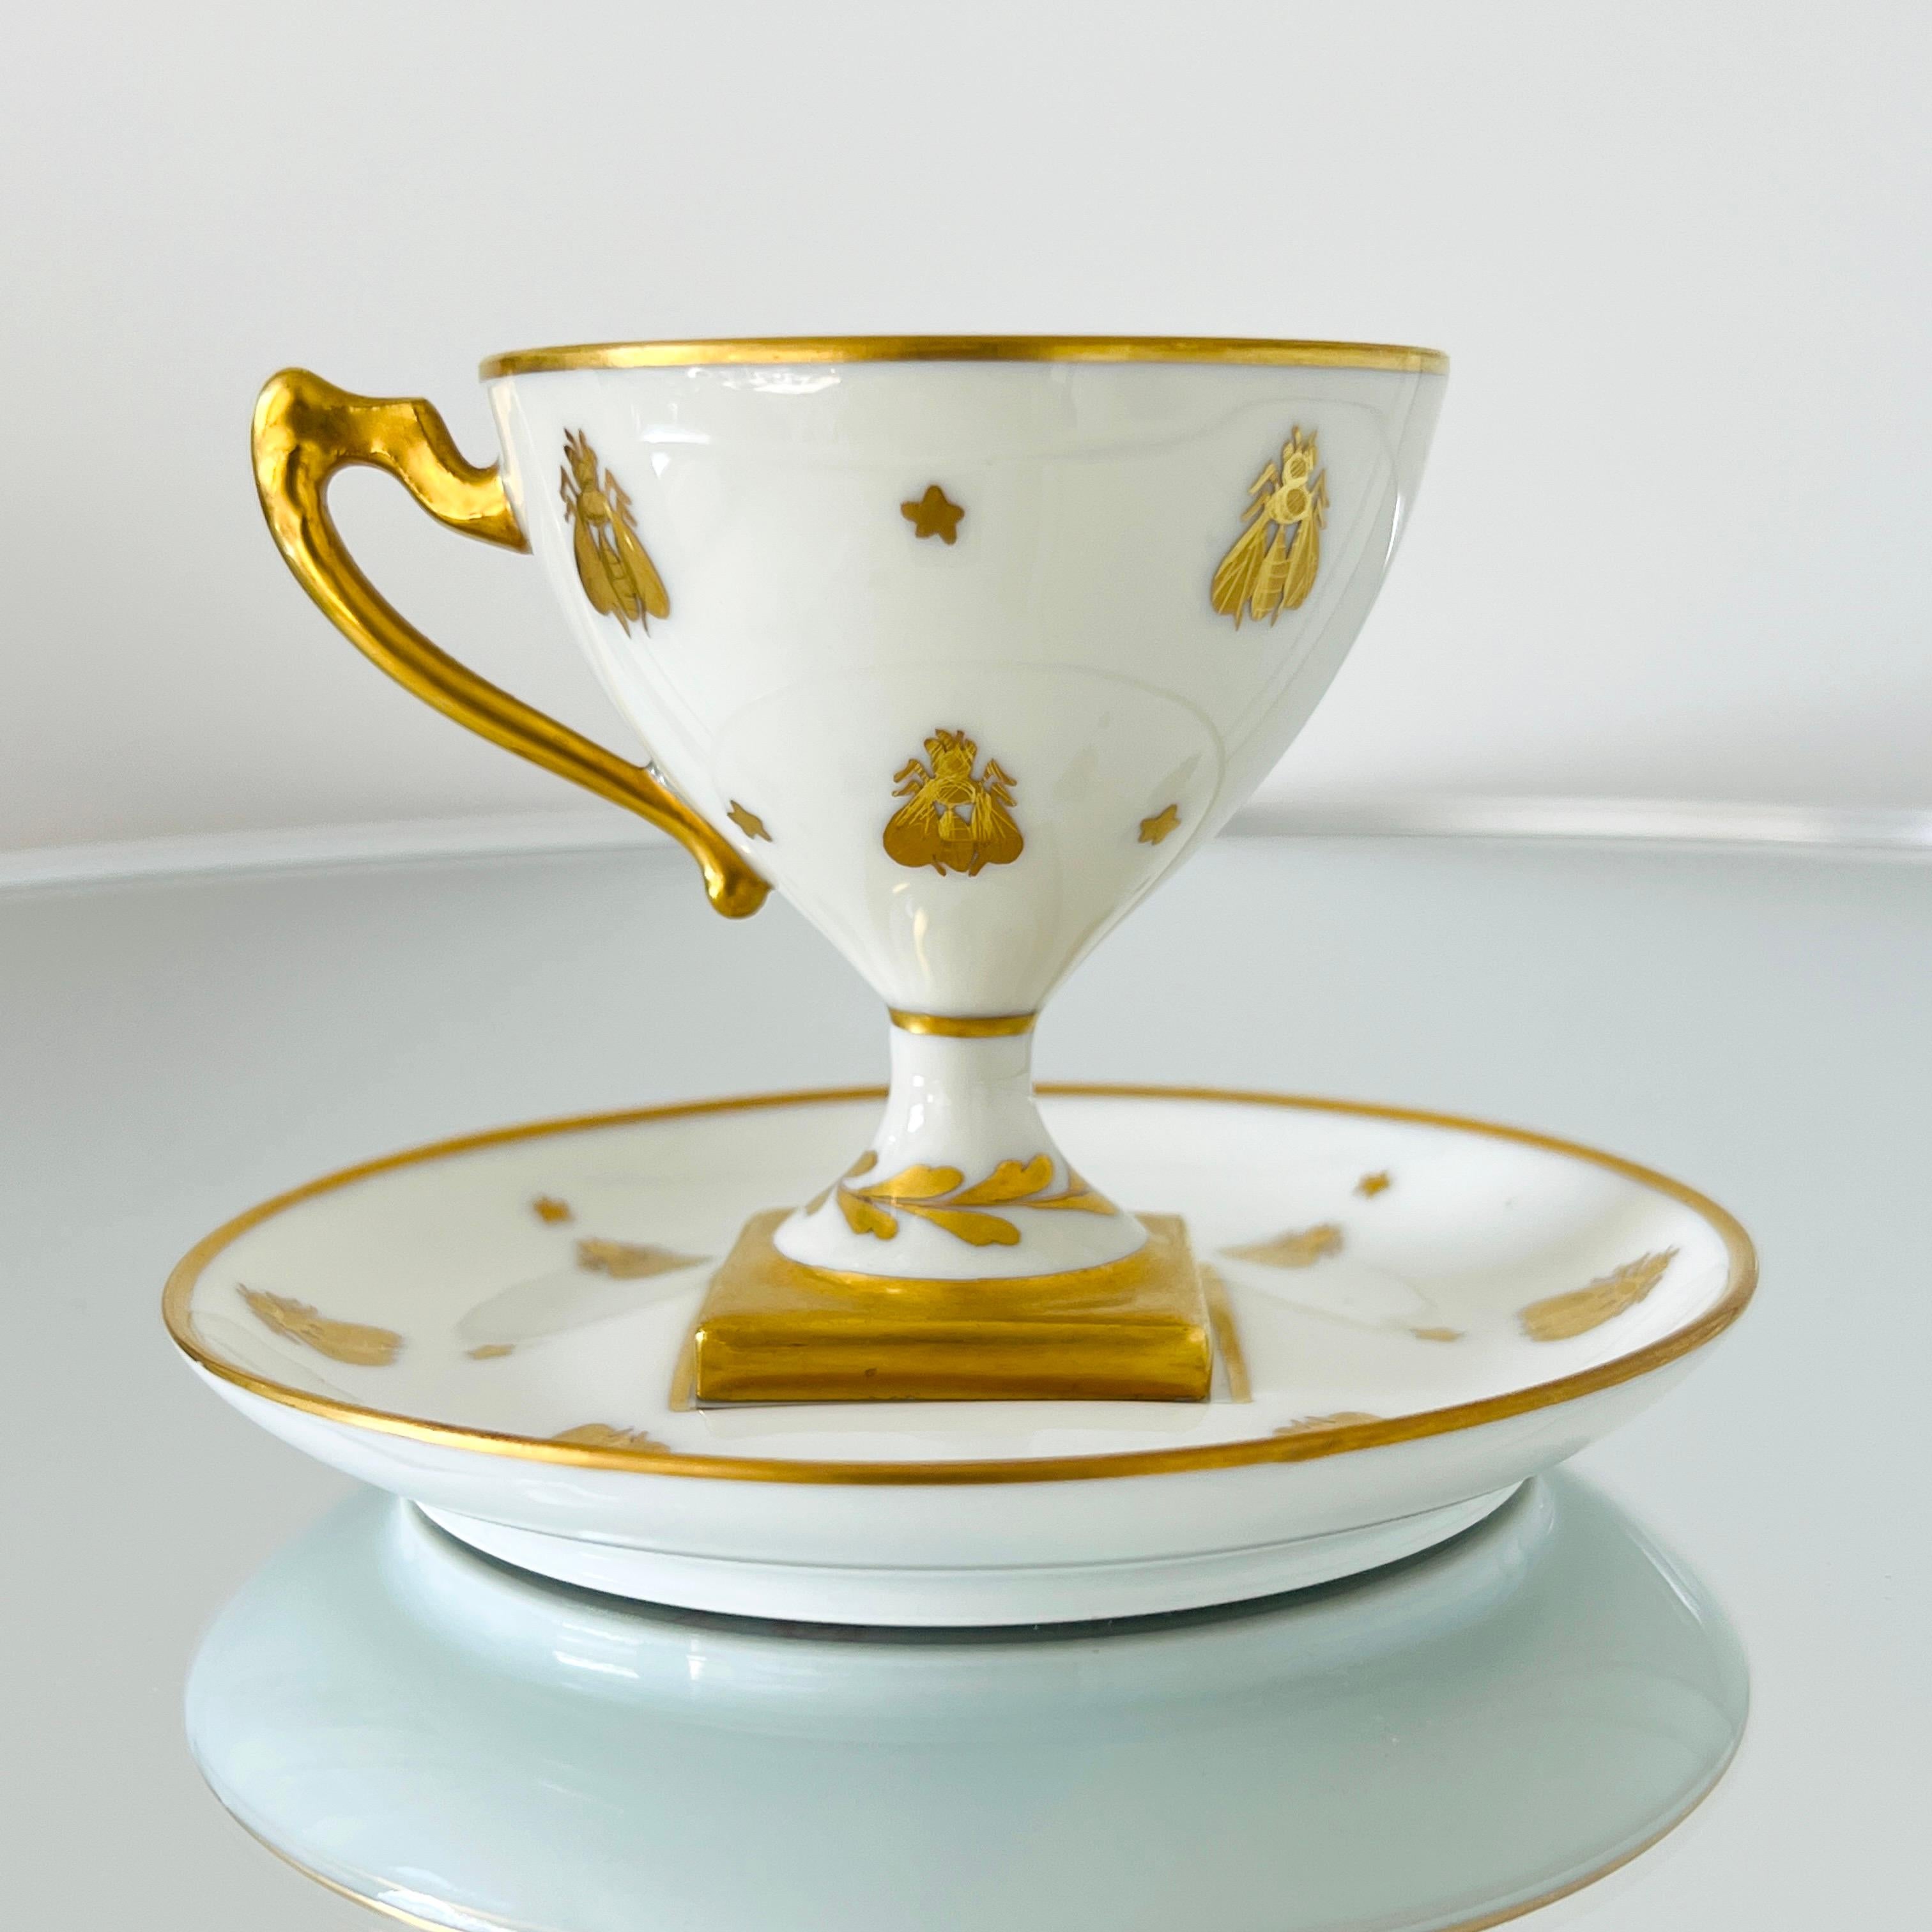 Hand-Crafted Le Tallec Golden Bees Porcelain Demitasse Cups and Saucers, circa 1957 Set/11-12 For Sale